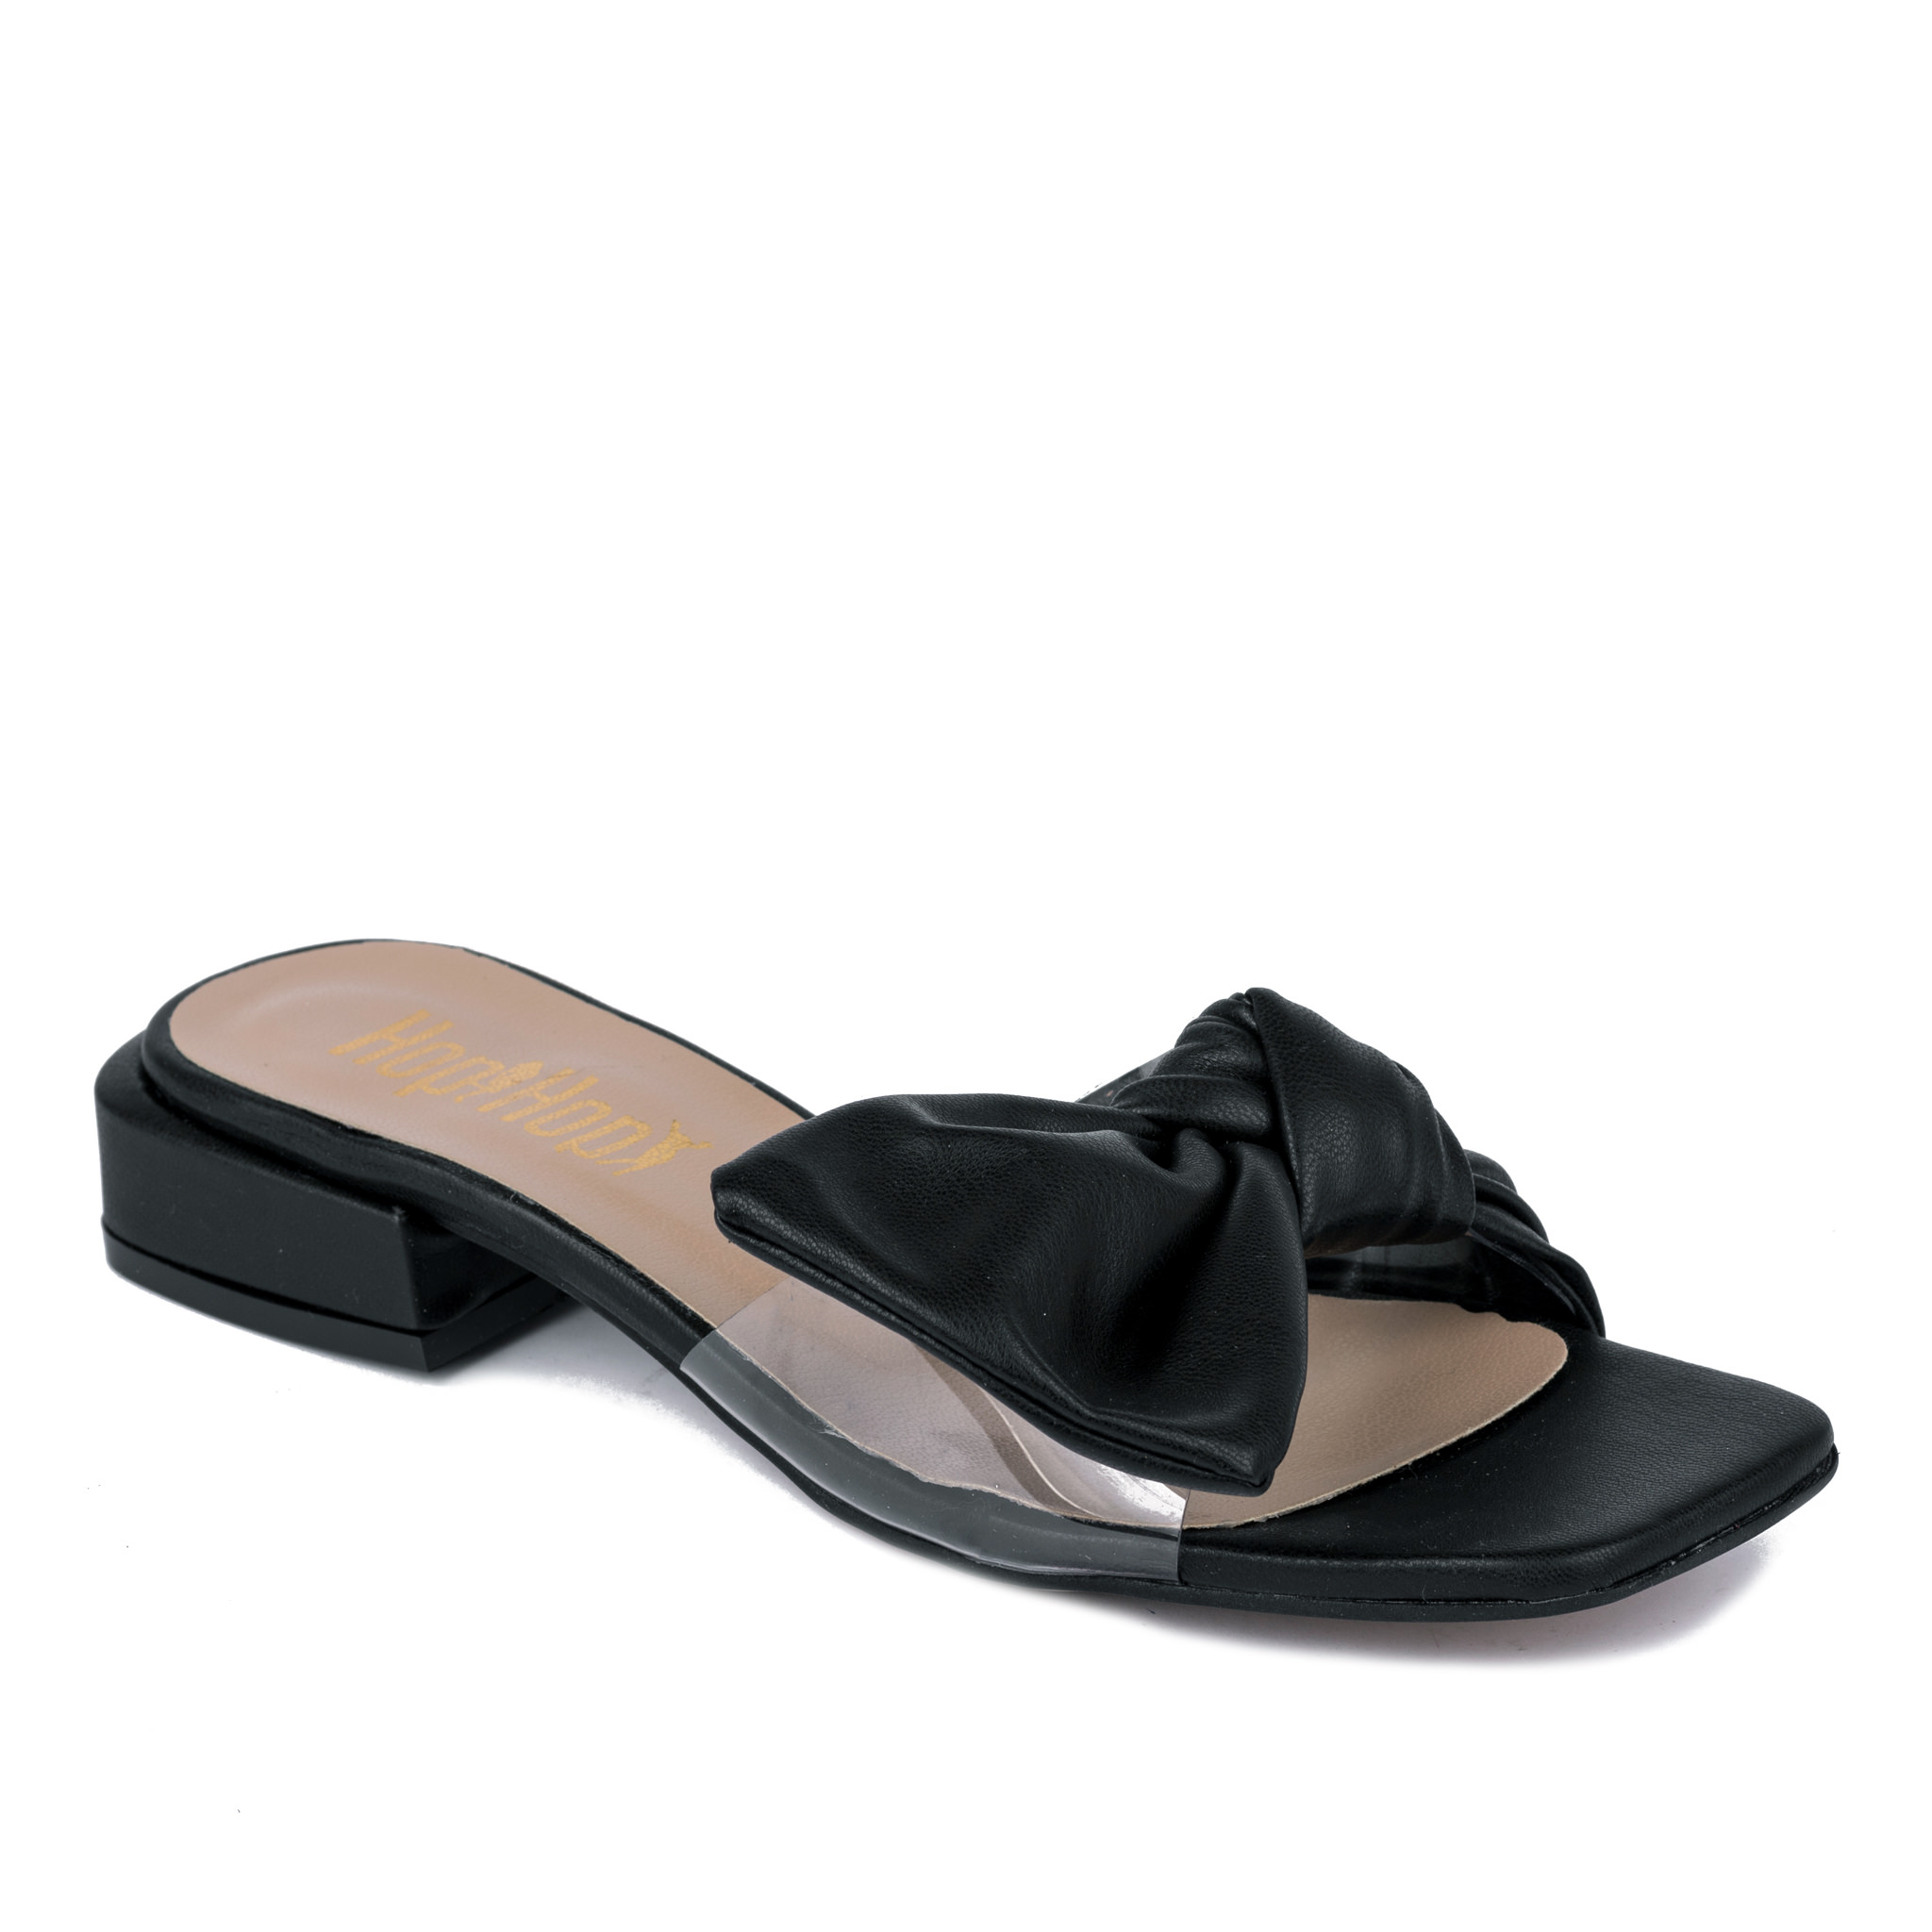 MULES WITH LOW HEEL AND BOW - BLACK